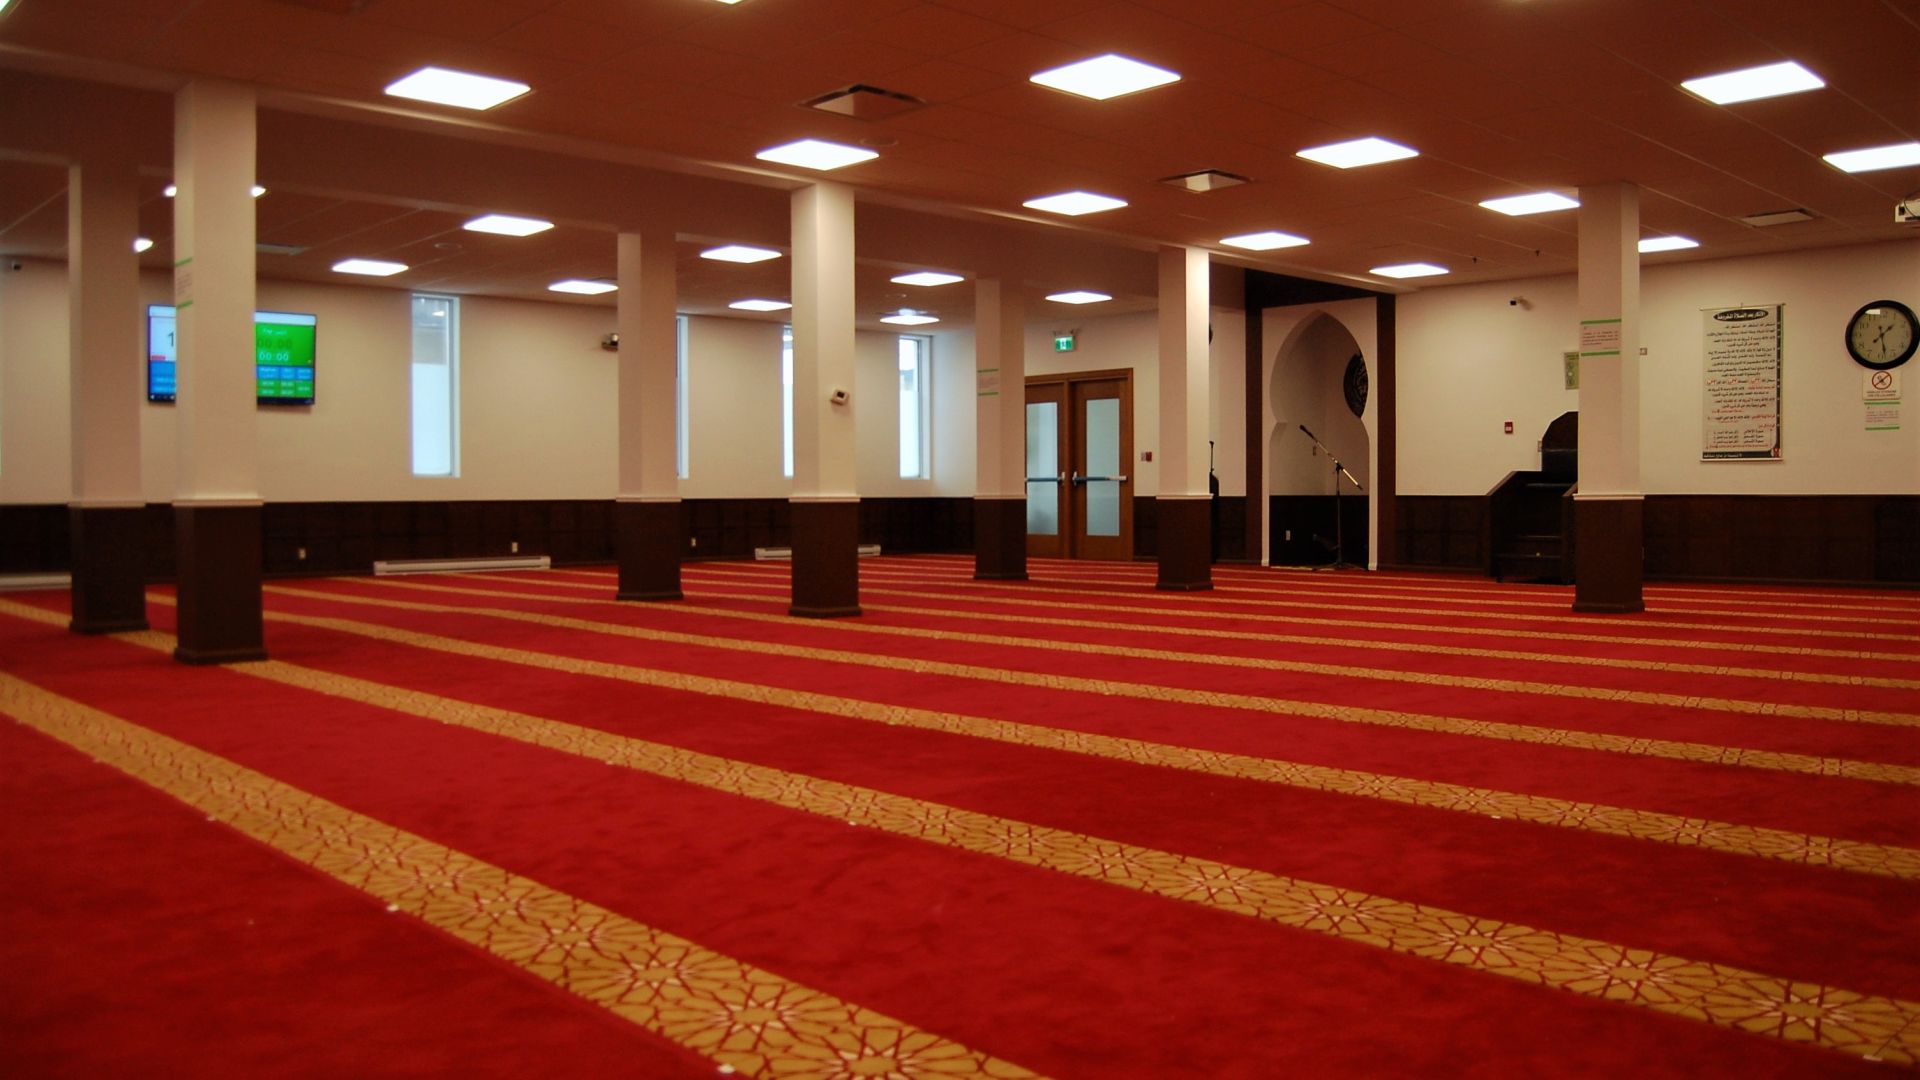 The main prayer room at the Quebec Islamic Cultural Centre is pictured